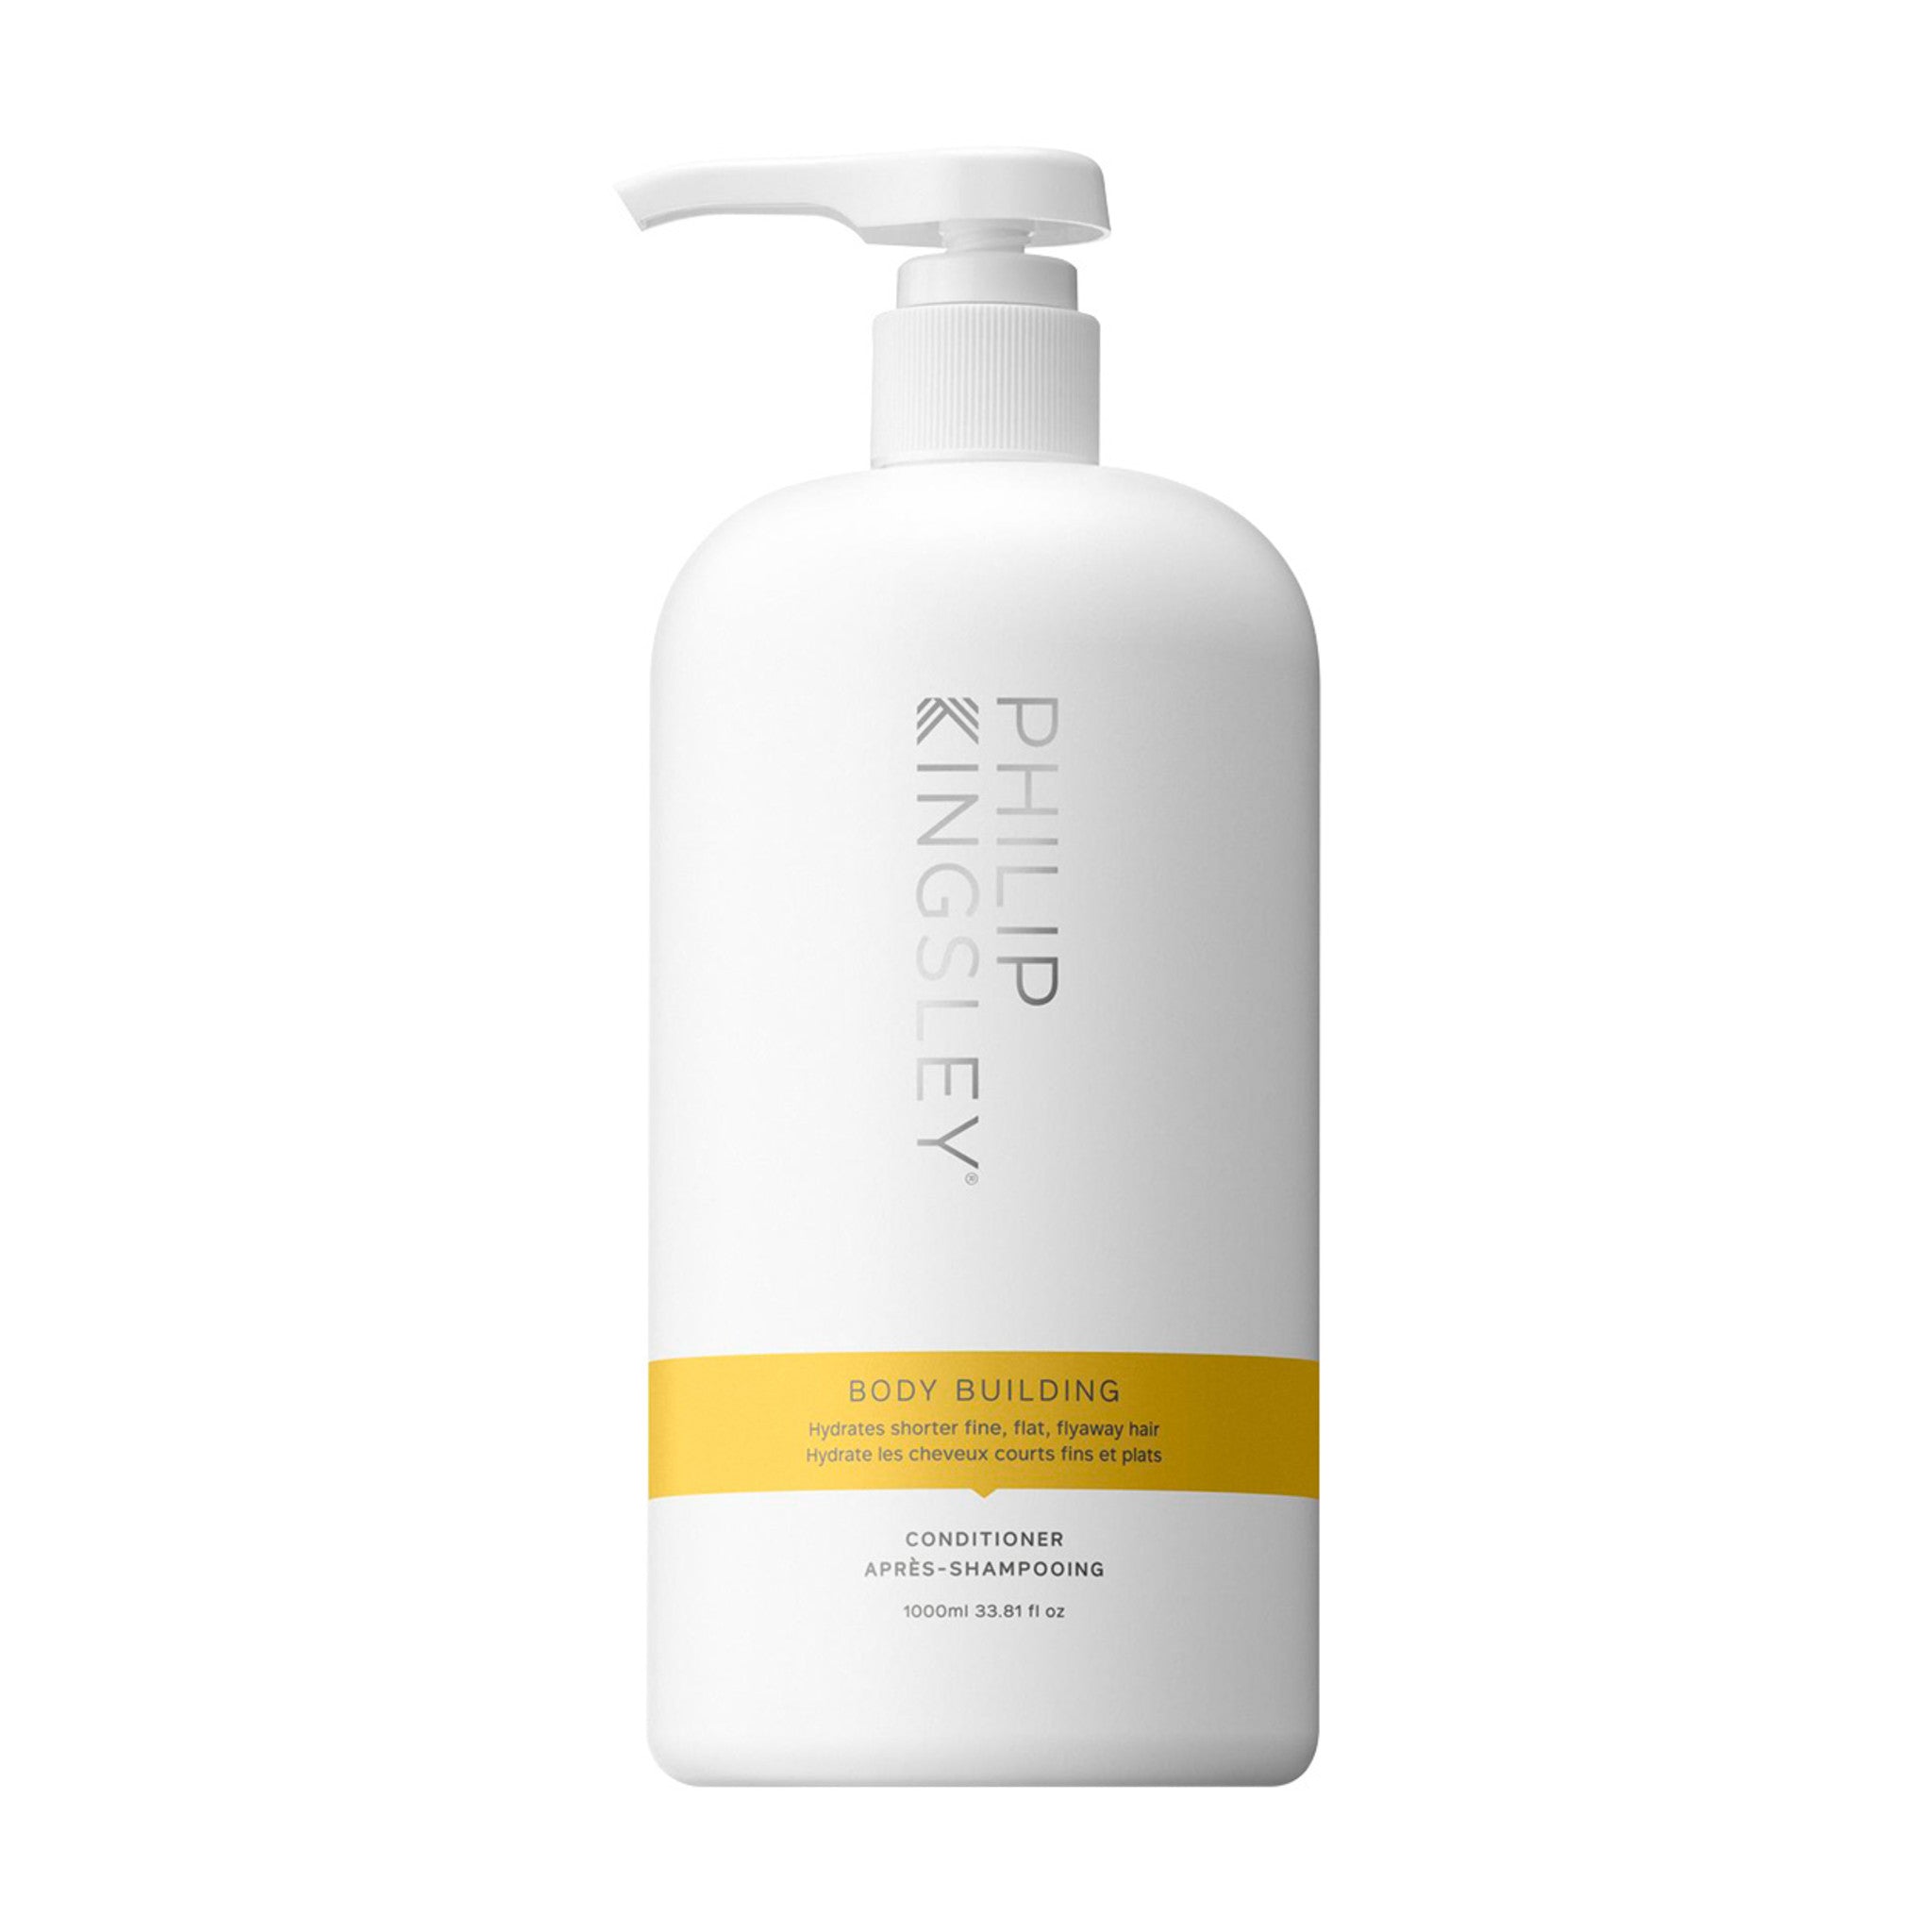 Philip Kingsley Body Building Weightless Conditioner Size variant: 33.81 fl oz | 100 ml main image.